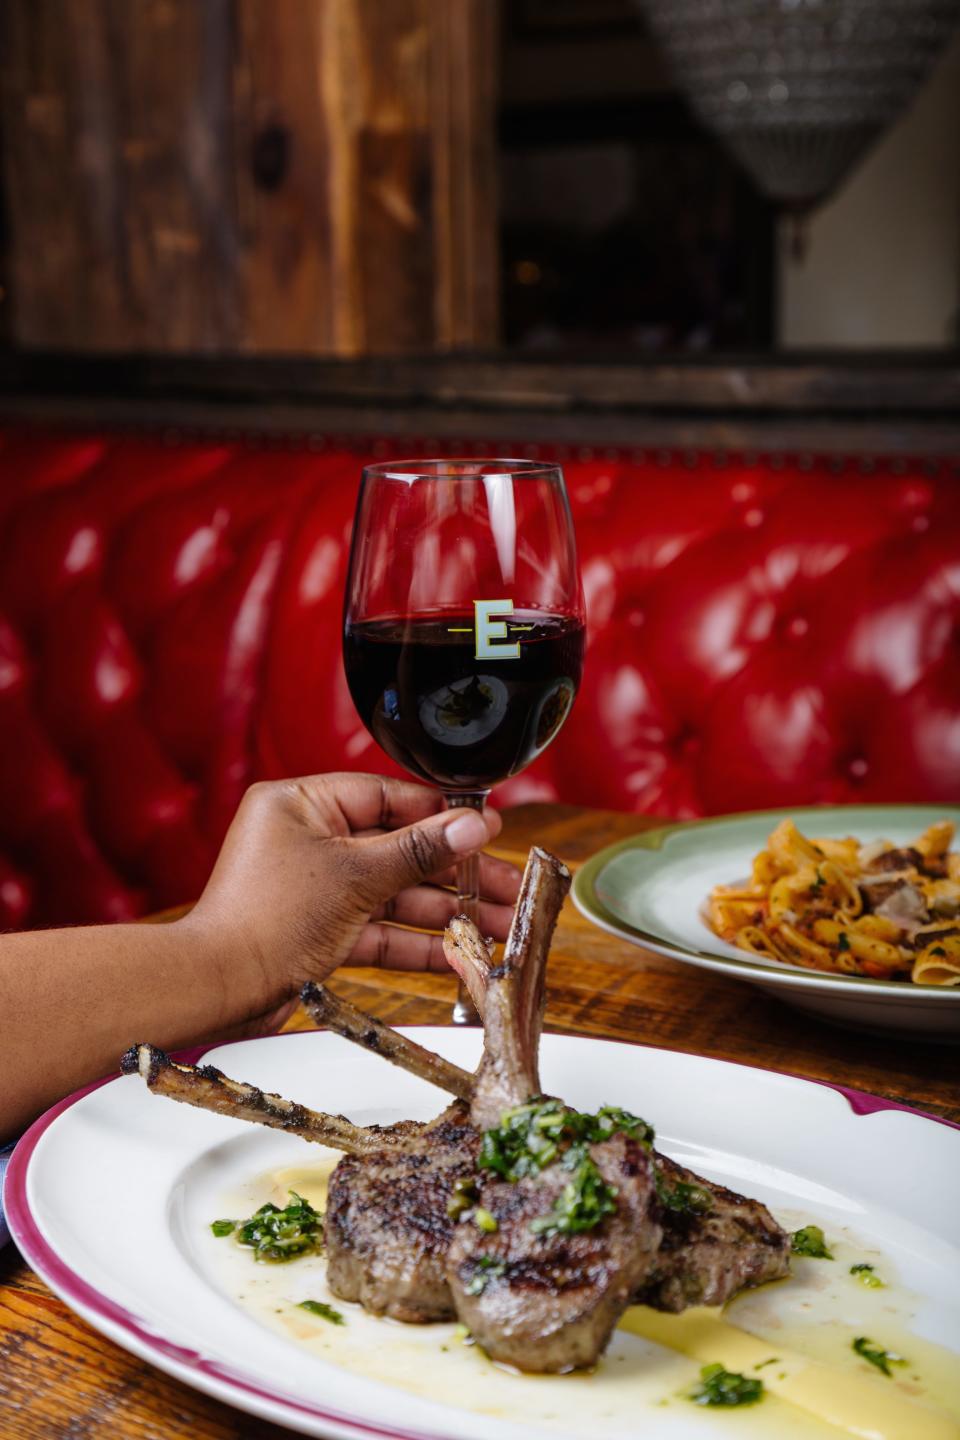 On Easter, both West Palm Beach and Delray Beach  Elisabetta's Ristorante locations will offer Scottadito-grilled lamb chops with chili oil and aioli for only $38.